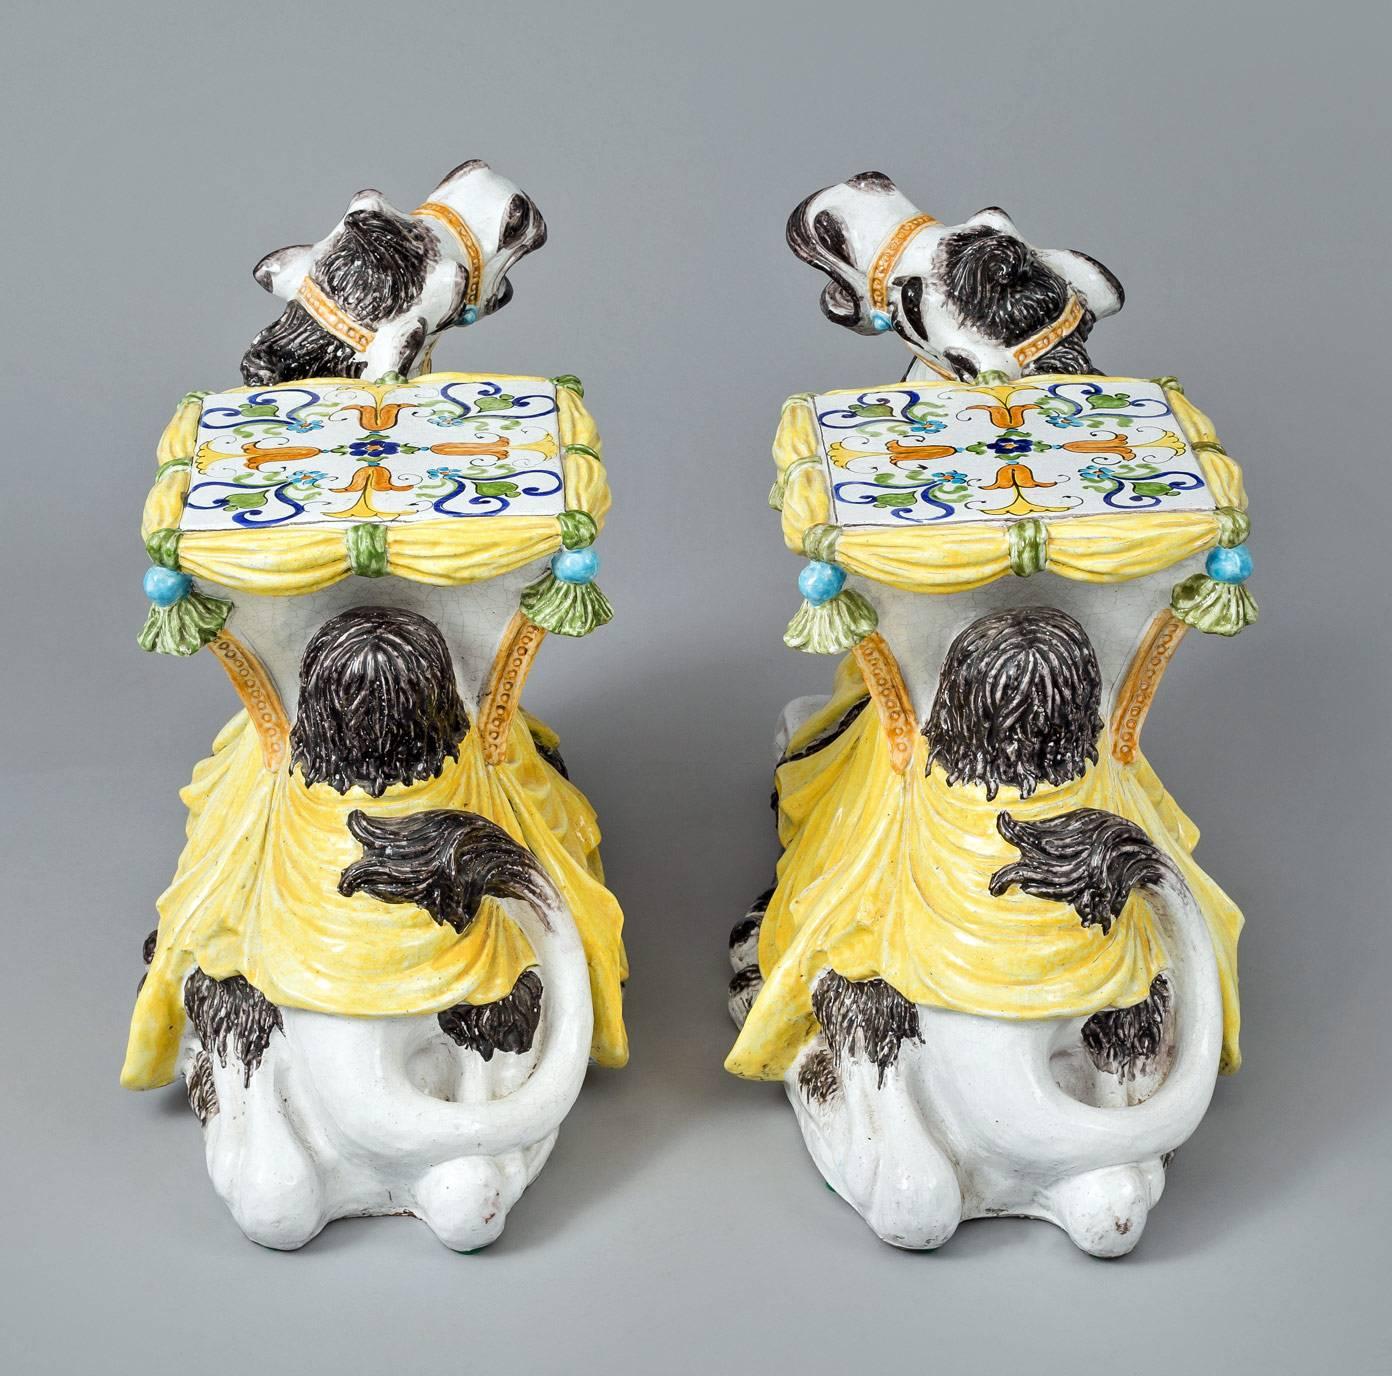 Mid-20th Century Pair of Italian Majolica Camel Side Tables or Garden Seat